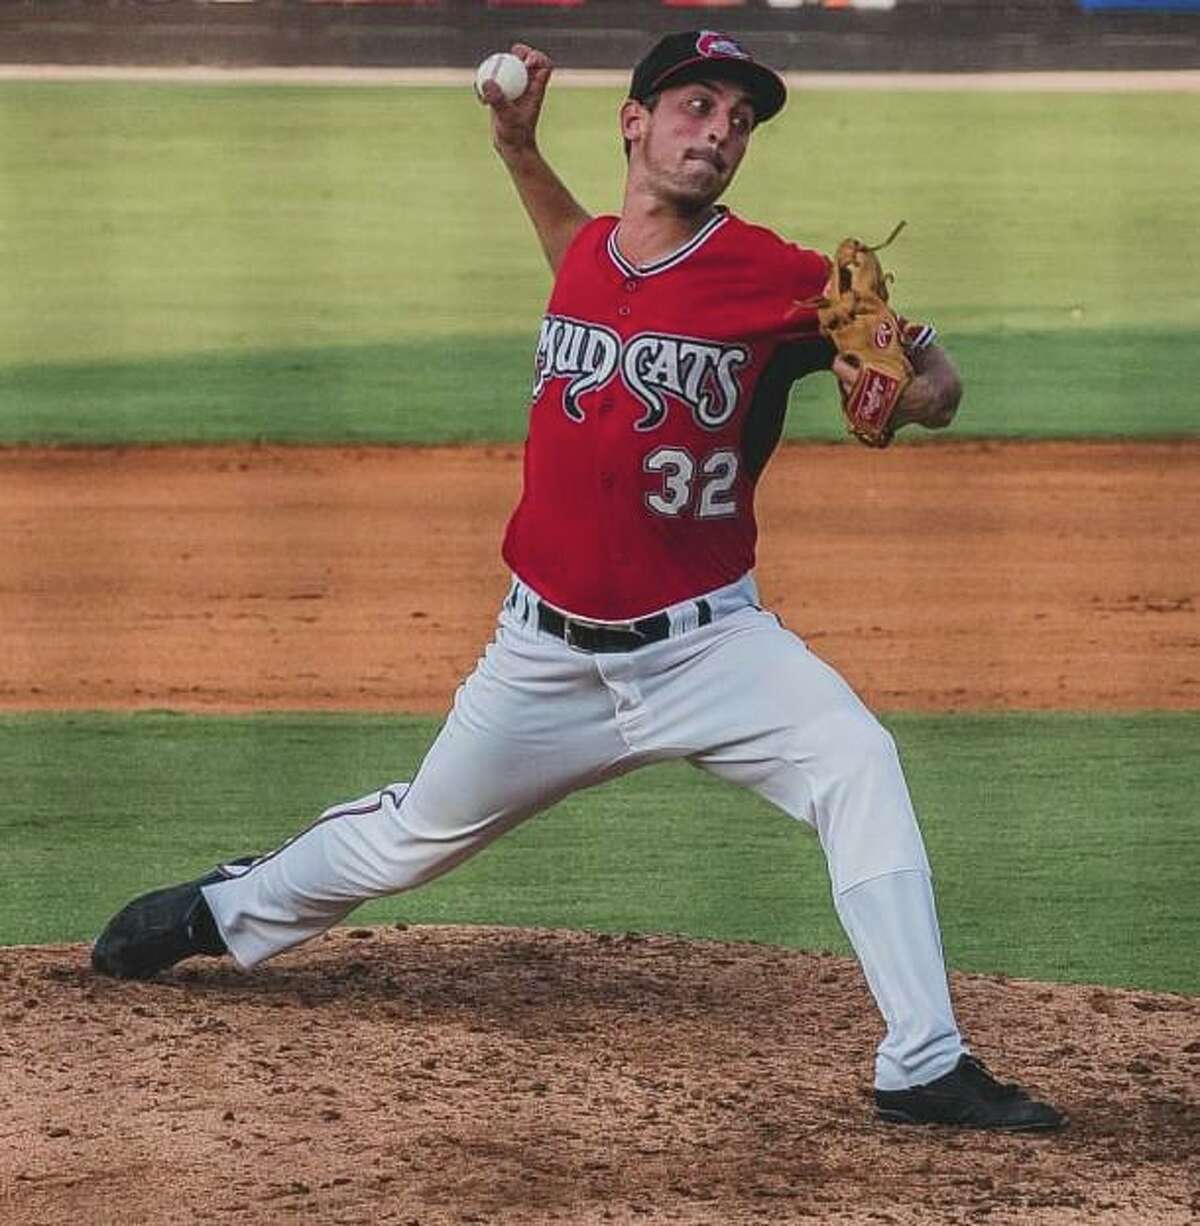 JT Hintzen, a Greenwich native, is 1-2 with a 3.42 ERA for the Carolina Mudcats this season. 2019